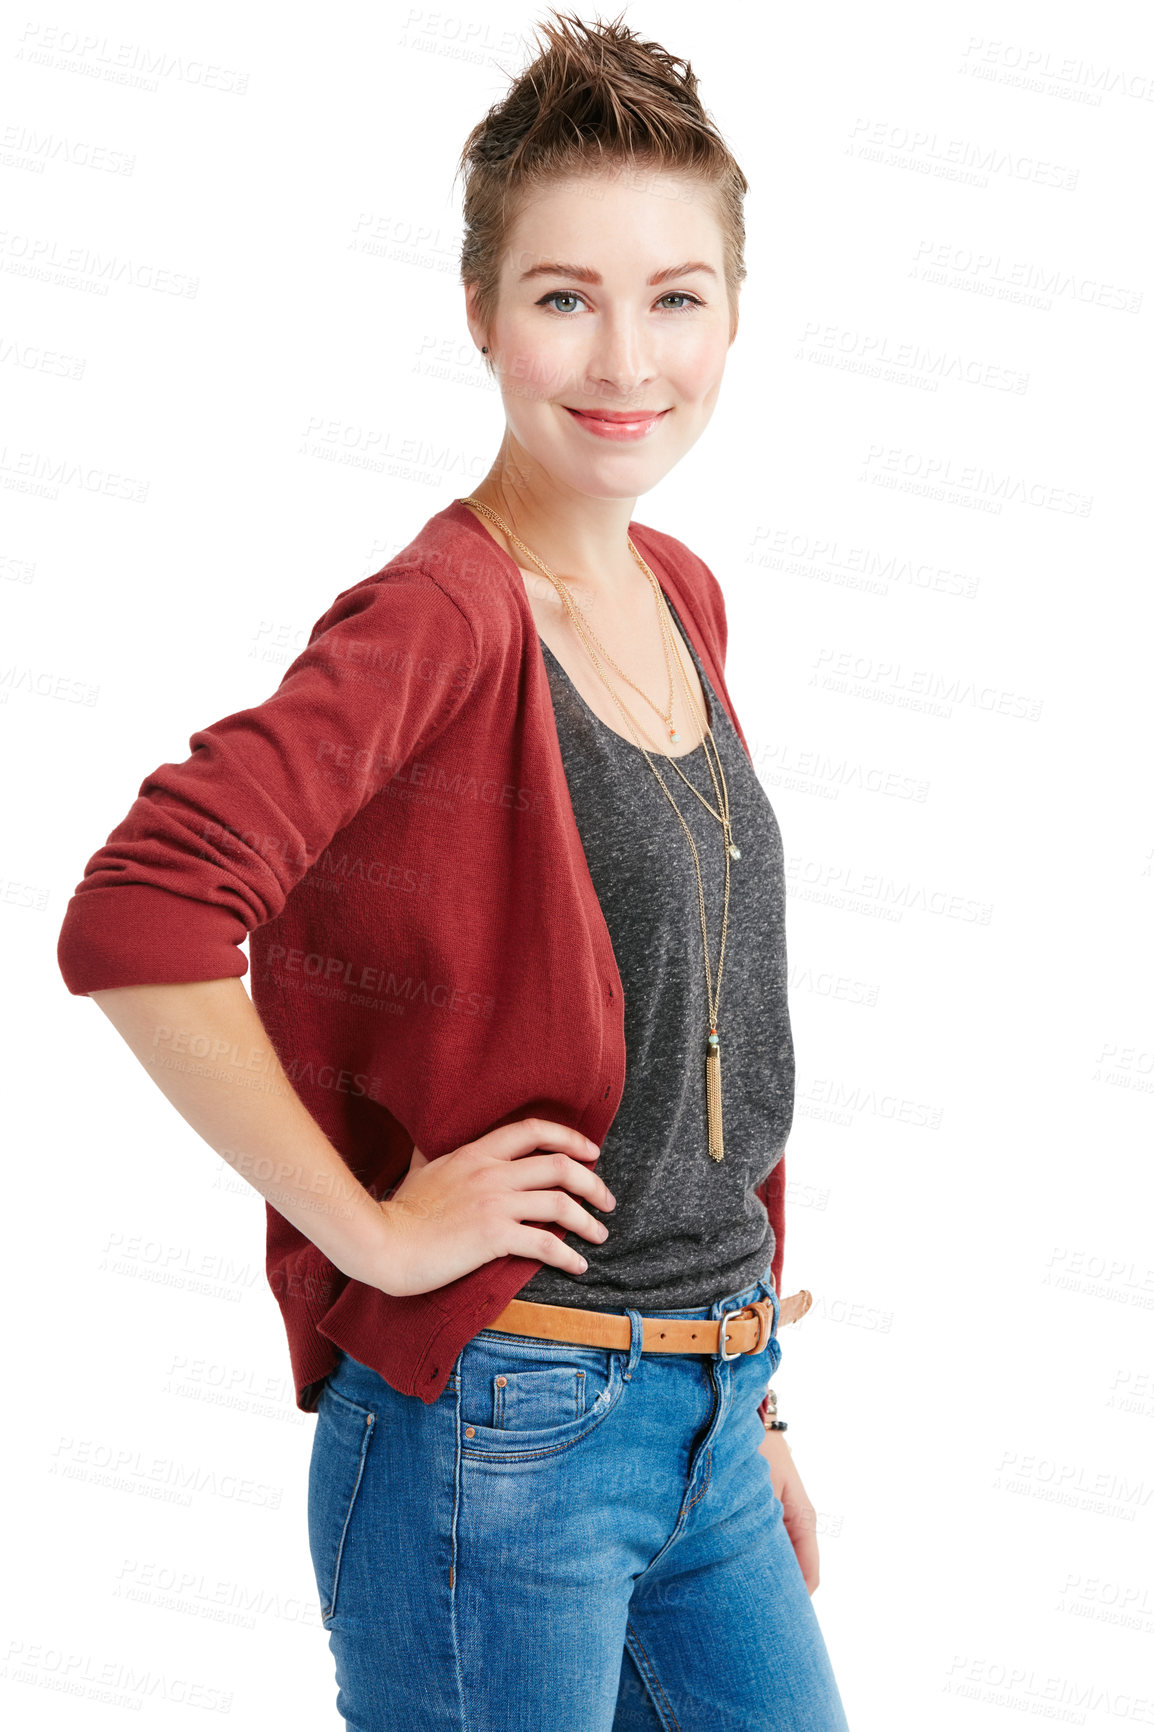 Buy stock photo Studio portrait of a confident young woman posing against a white background